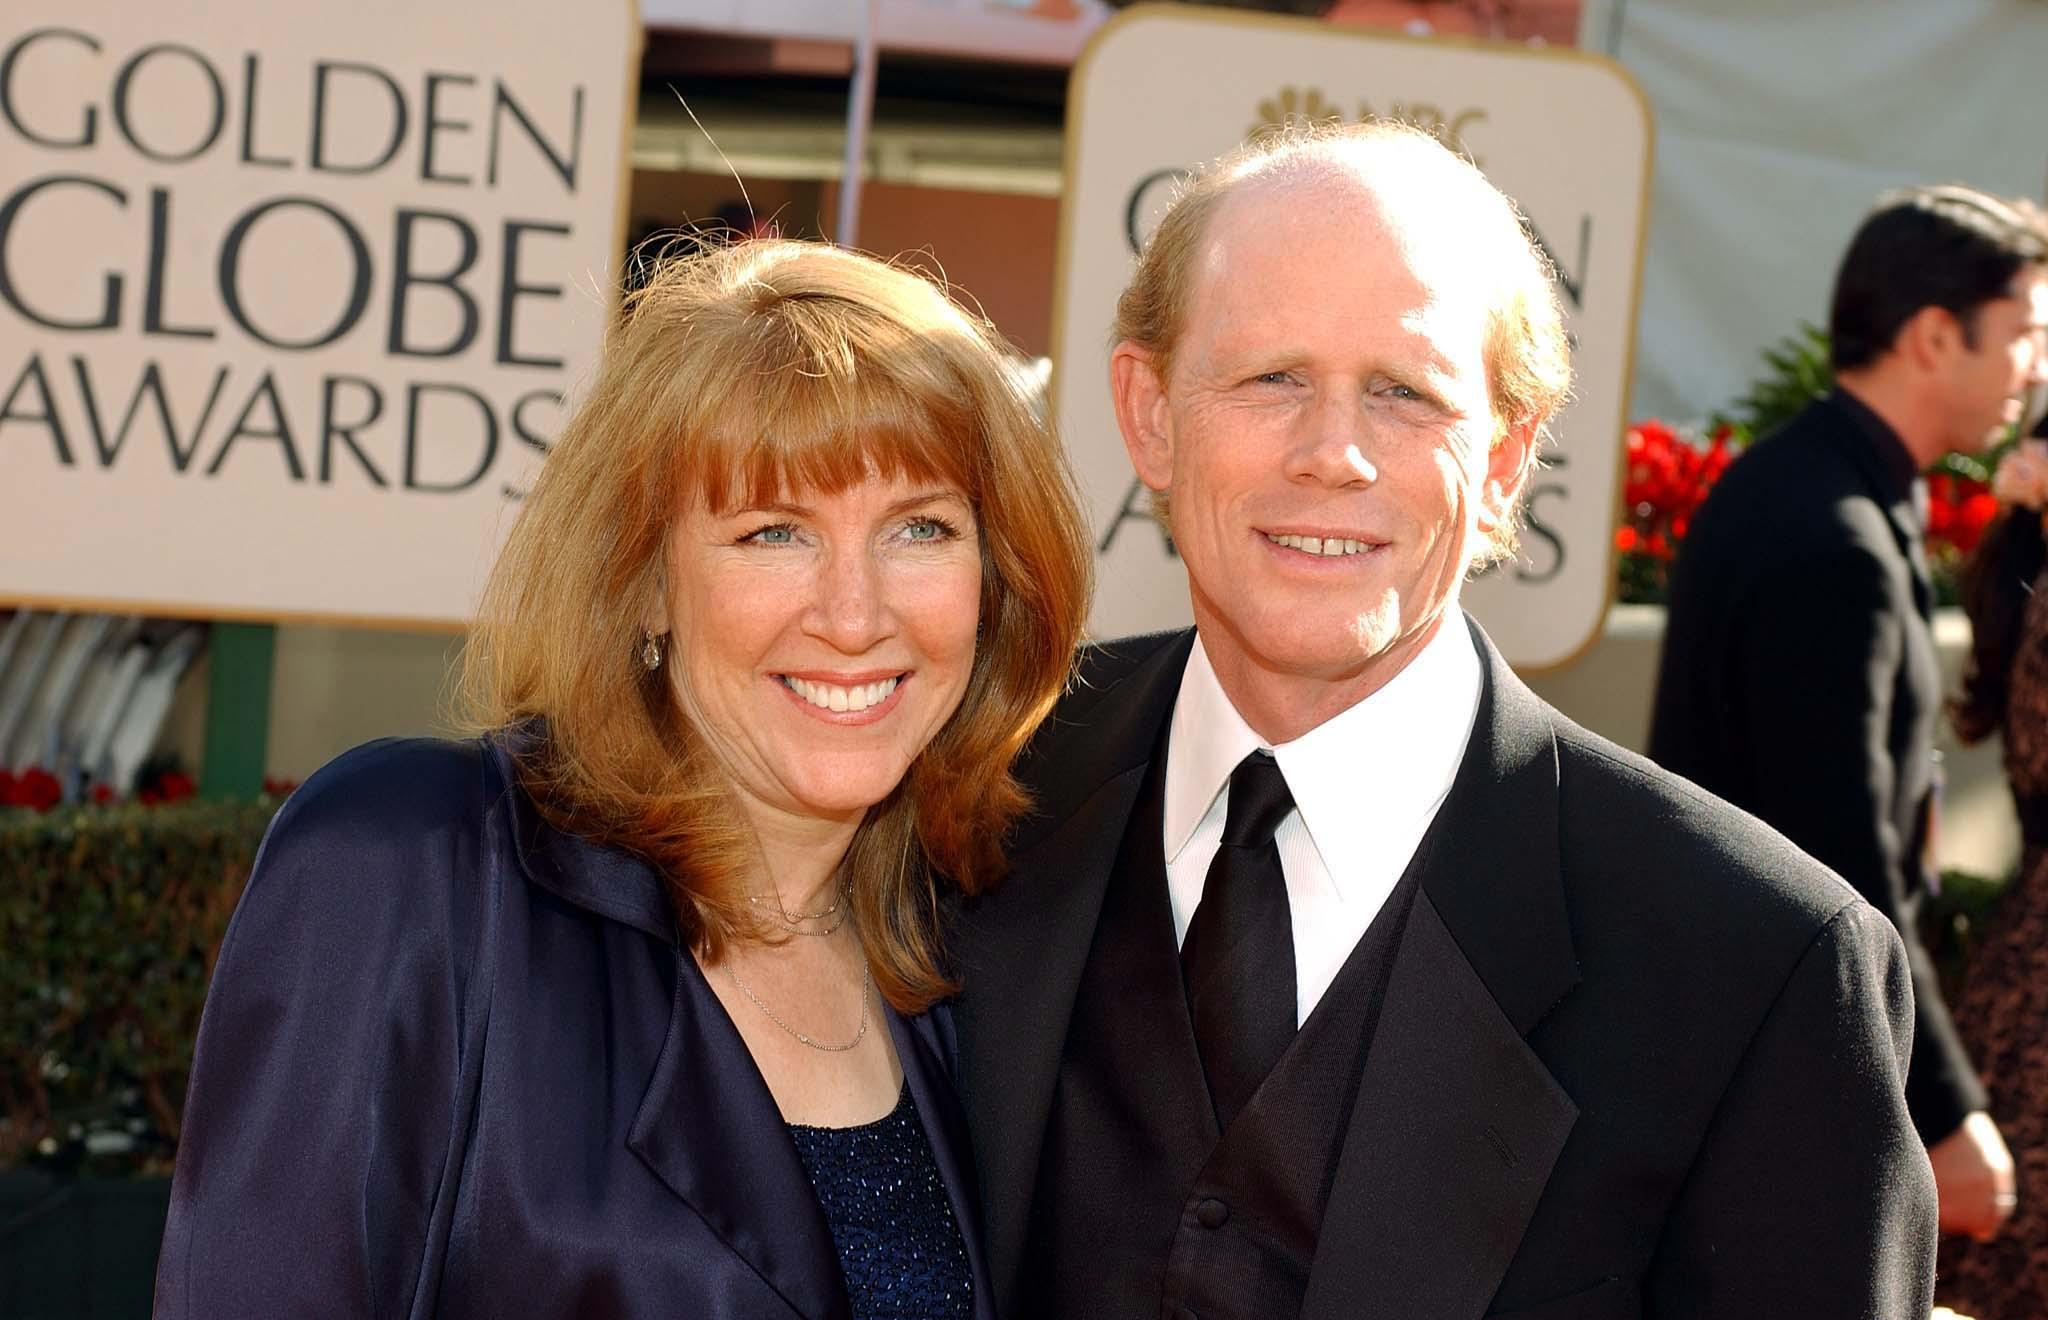 Director of the feature film, "A Beautiful Mind," Ron Howard (R) and his wife Sheryl at the 59th Annual Golden Globe Awards at the Beverly Hilton in Beverly Hills, California on January 20, 2002 | Source: Getty Images